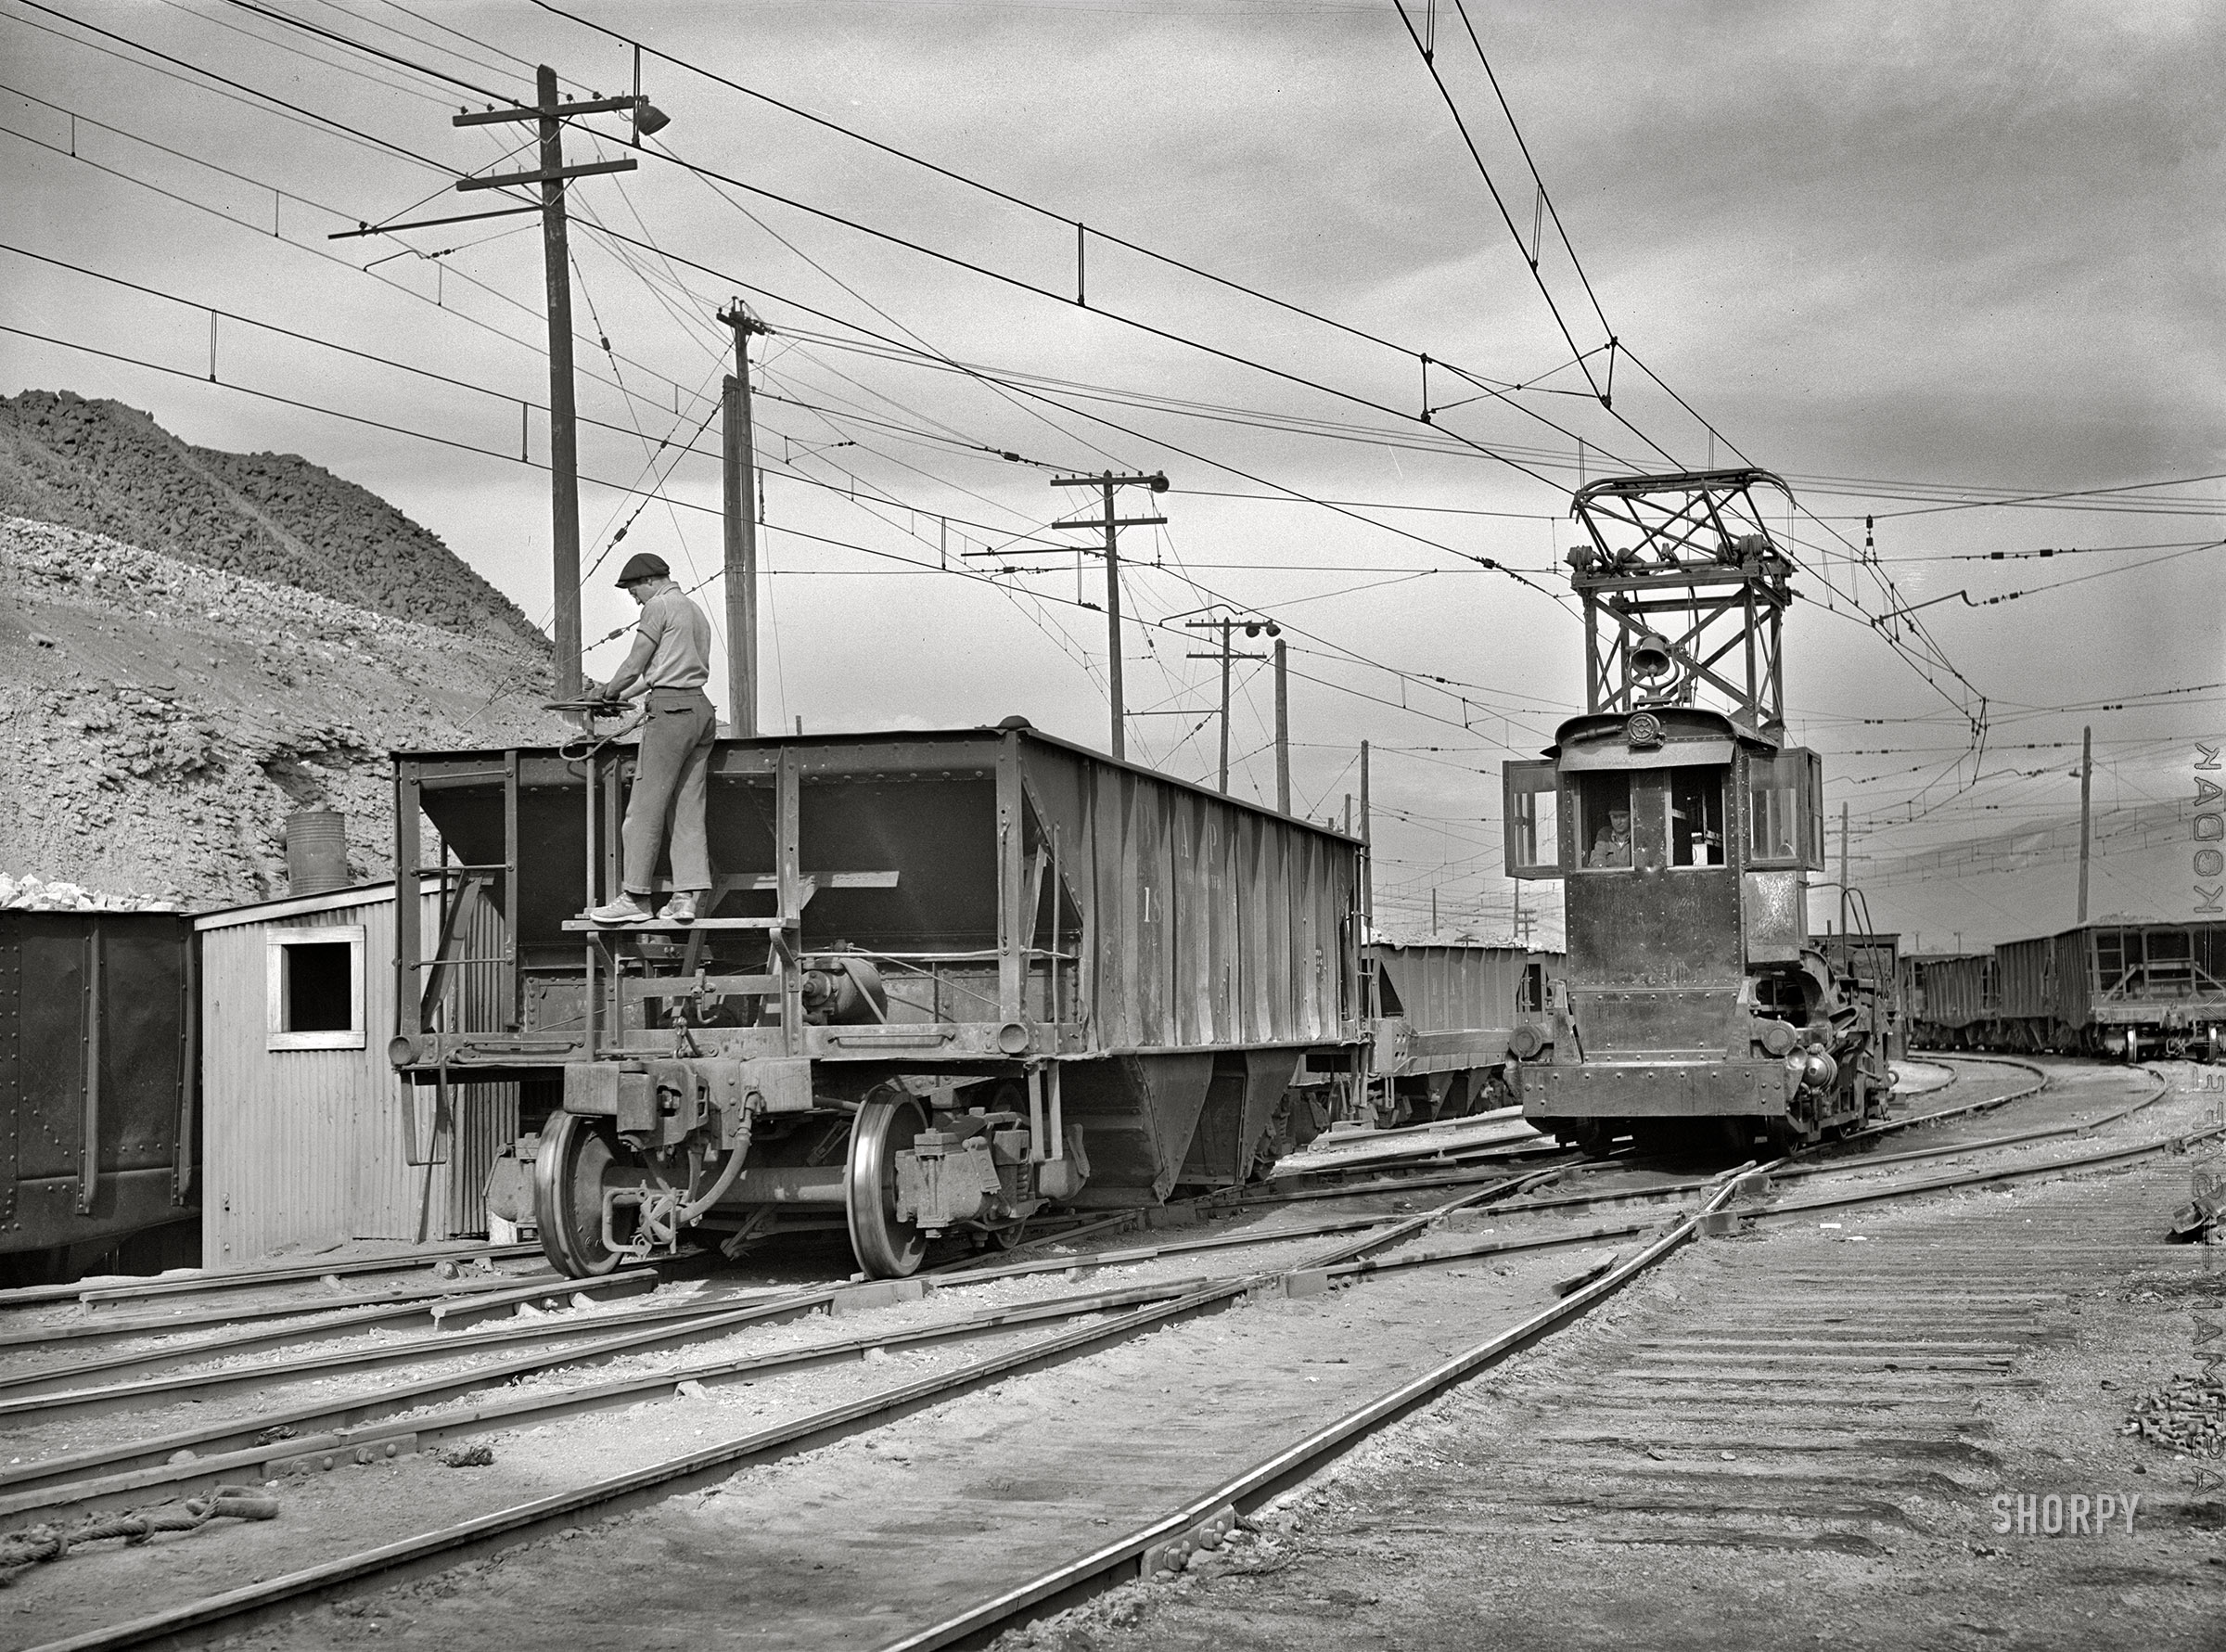 September 1942. Deer Lodge County, Montana. "Anaconda smelter, Anaconda Copper Mining Company. Individual ore cars are pushed to the ore dump by an electric locomotive." Acetate negative by Russell Lee for the Office of War Information. View full size.